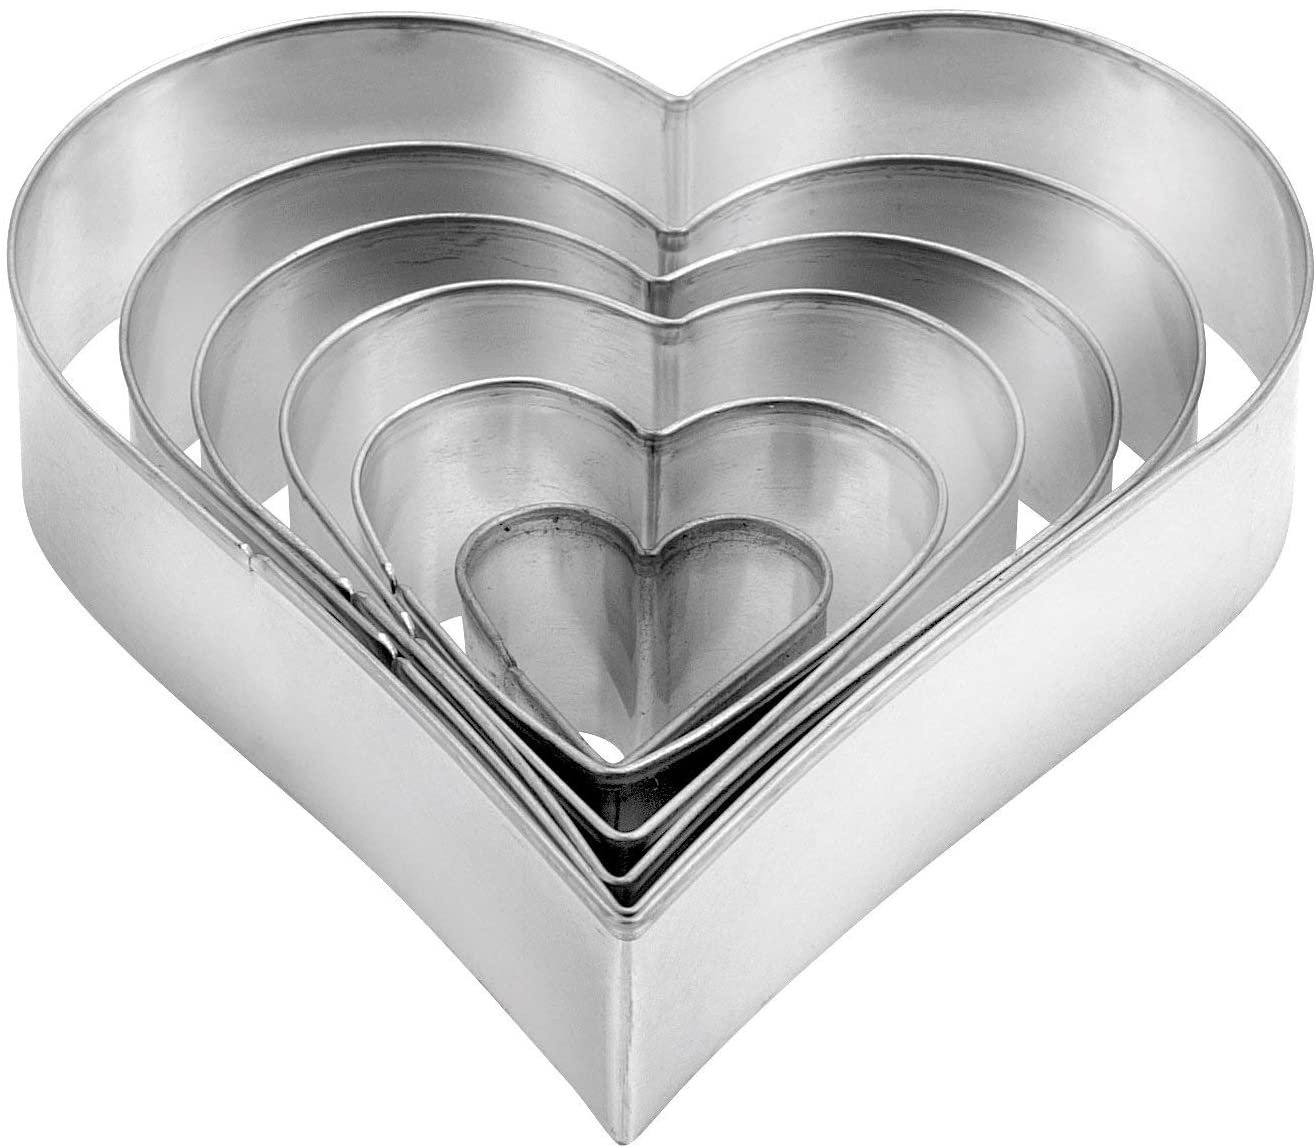 Tescoma Delícia Heart-Shaped 6-Piece Cookie Cutters